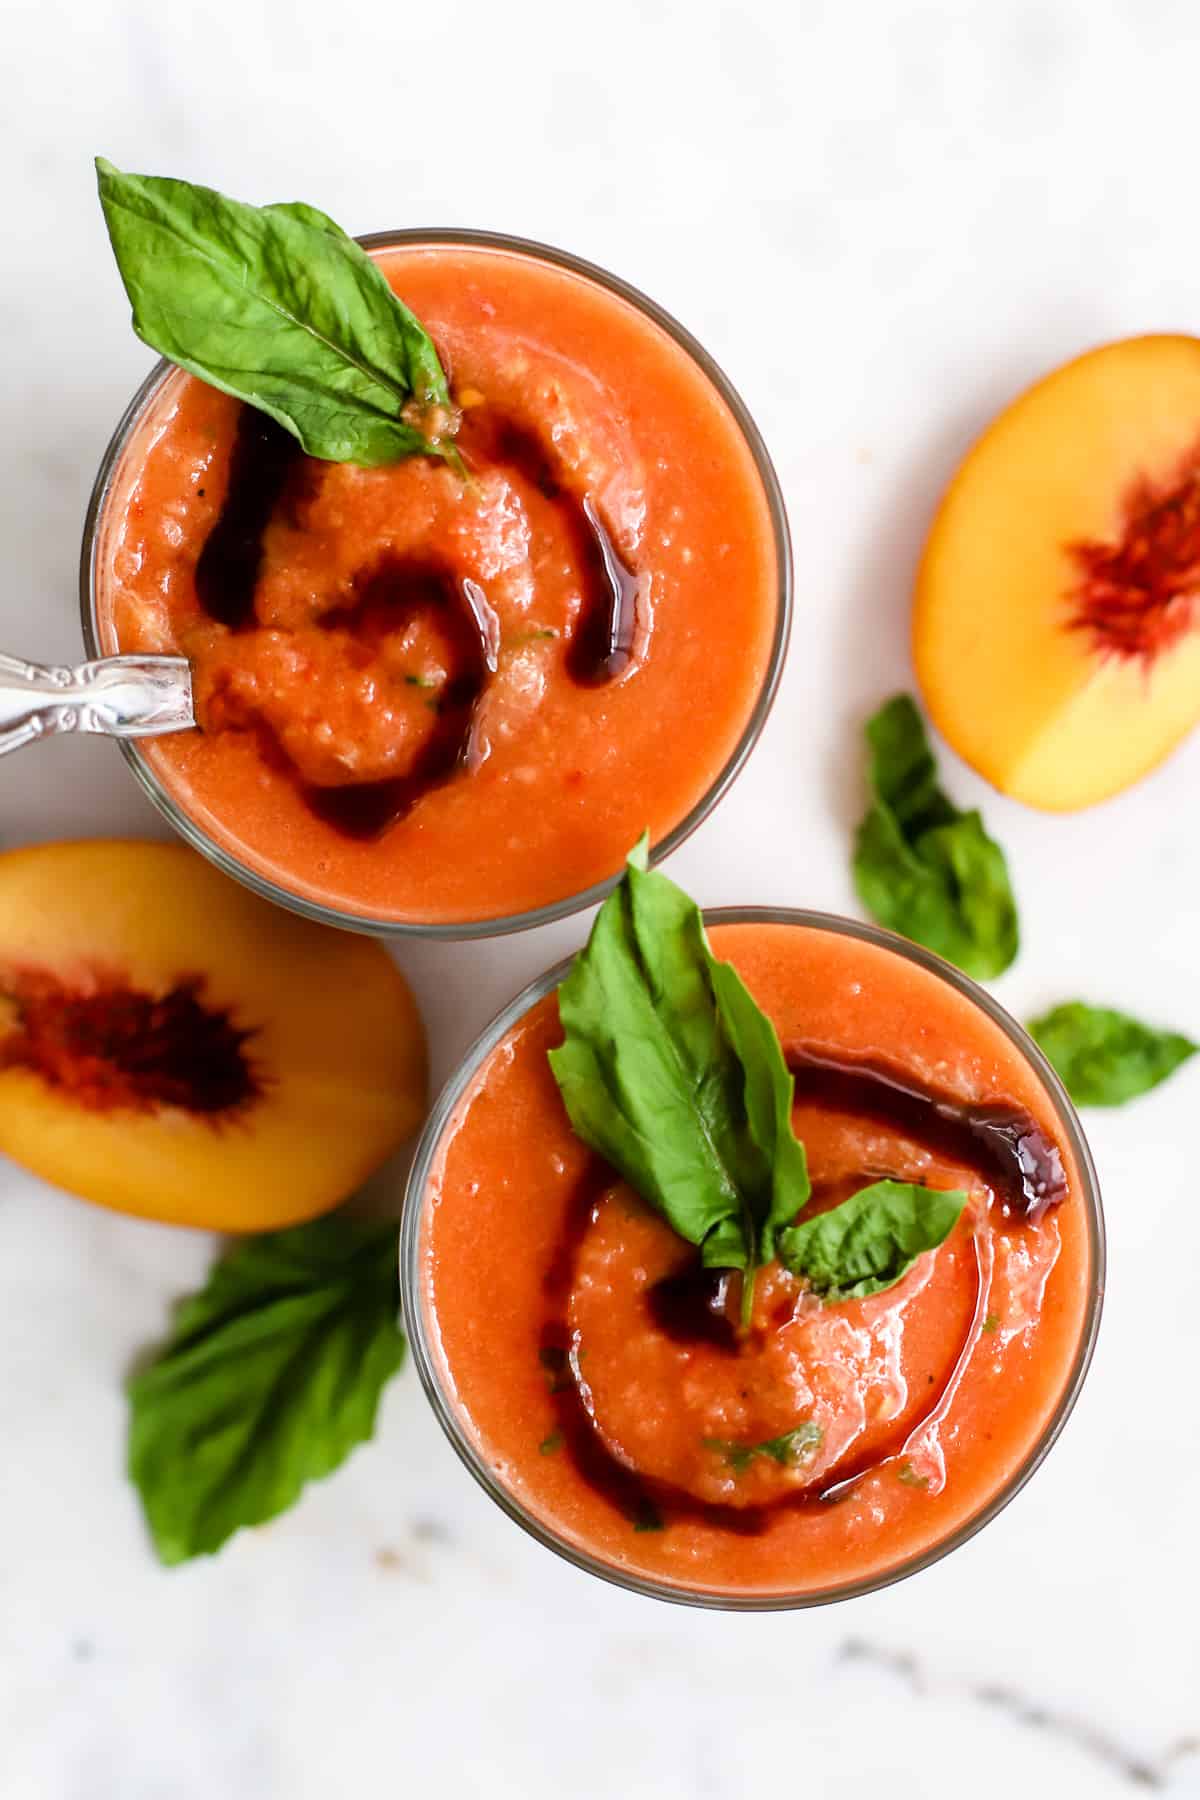 Two glasses of peach basil gazpacho with balsamic glaze swirl on top and basil leaf garnish, peach wedges on the side, on white marble surface